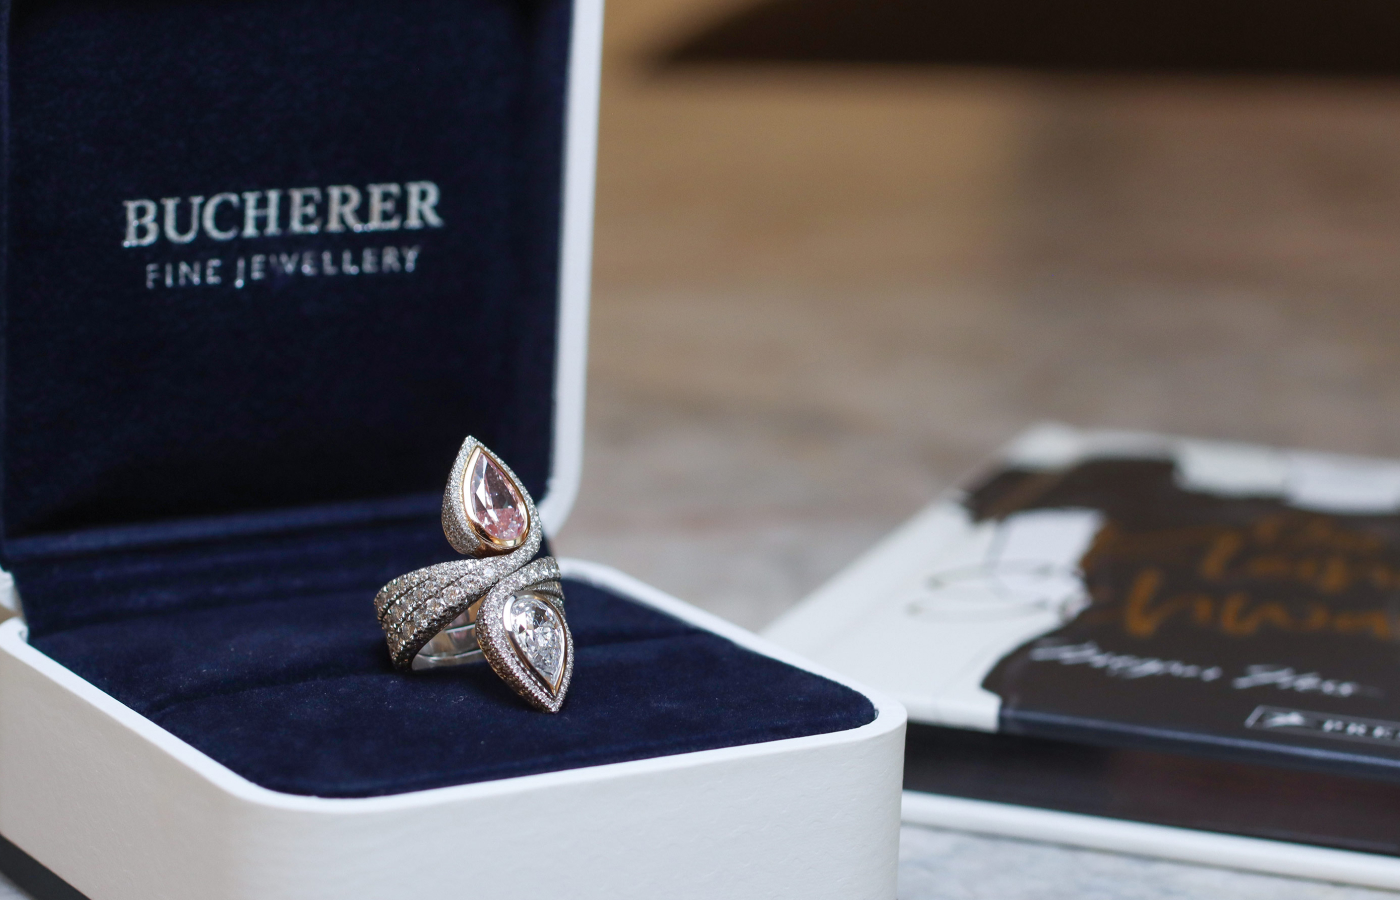 Bucherer Fine Jewellery Toi & Moi ring in platinum and diamond, featuring a fancy intense pink pear-cut diamond